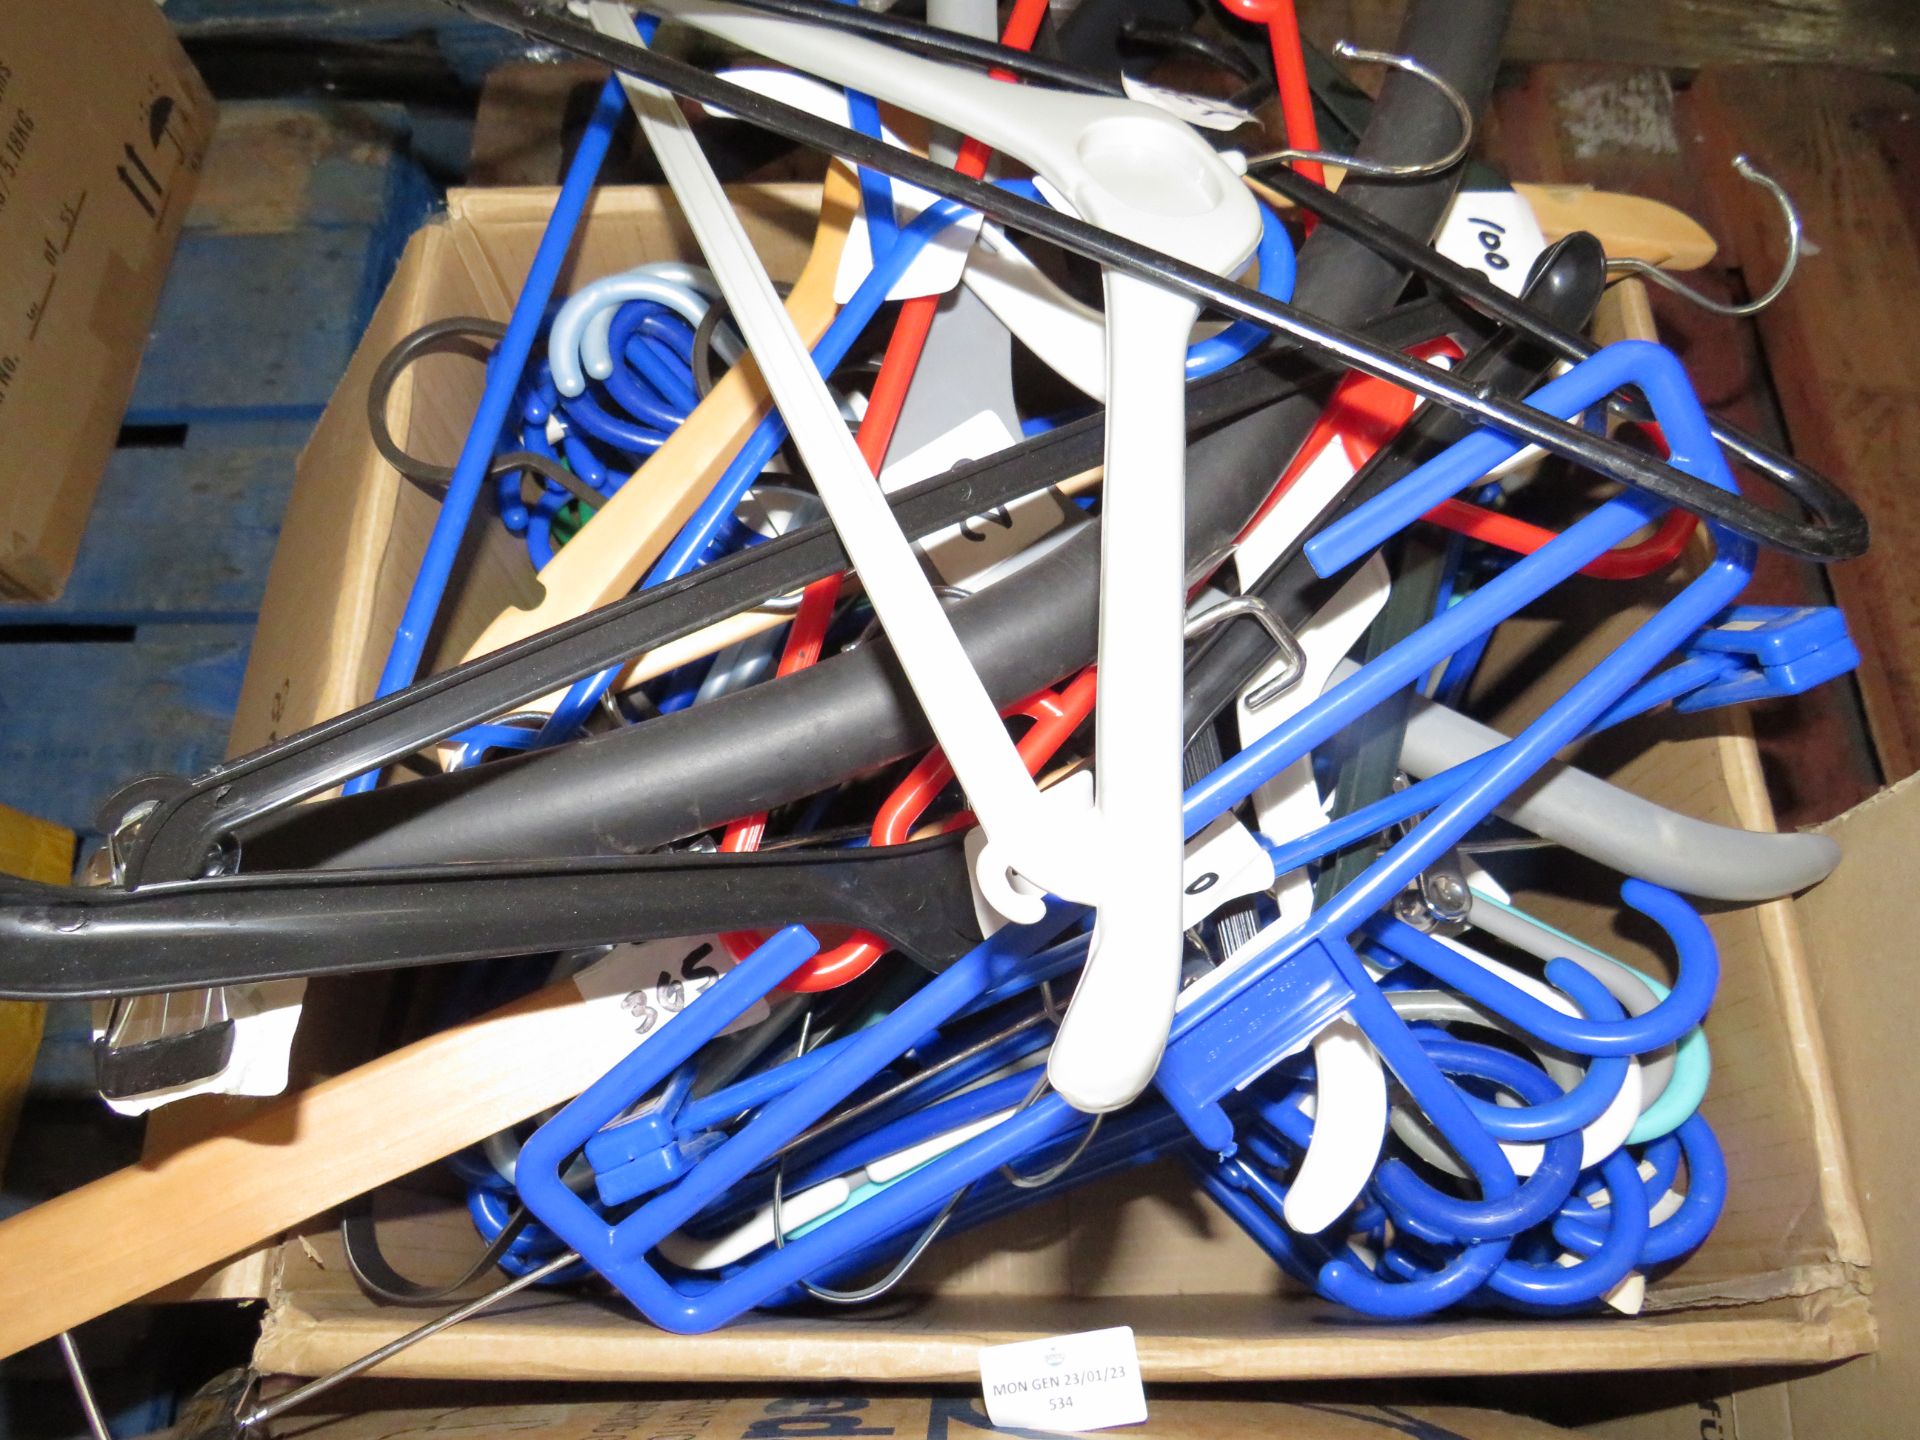 1x Box Containing Approx 65x Assorted Hangers - Used Condition.